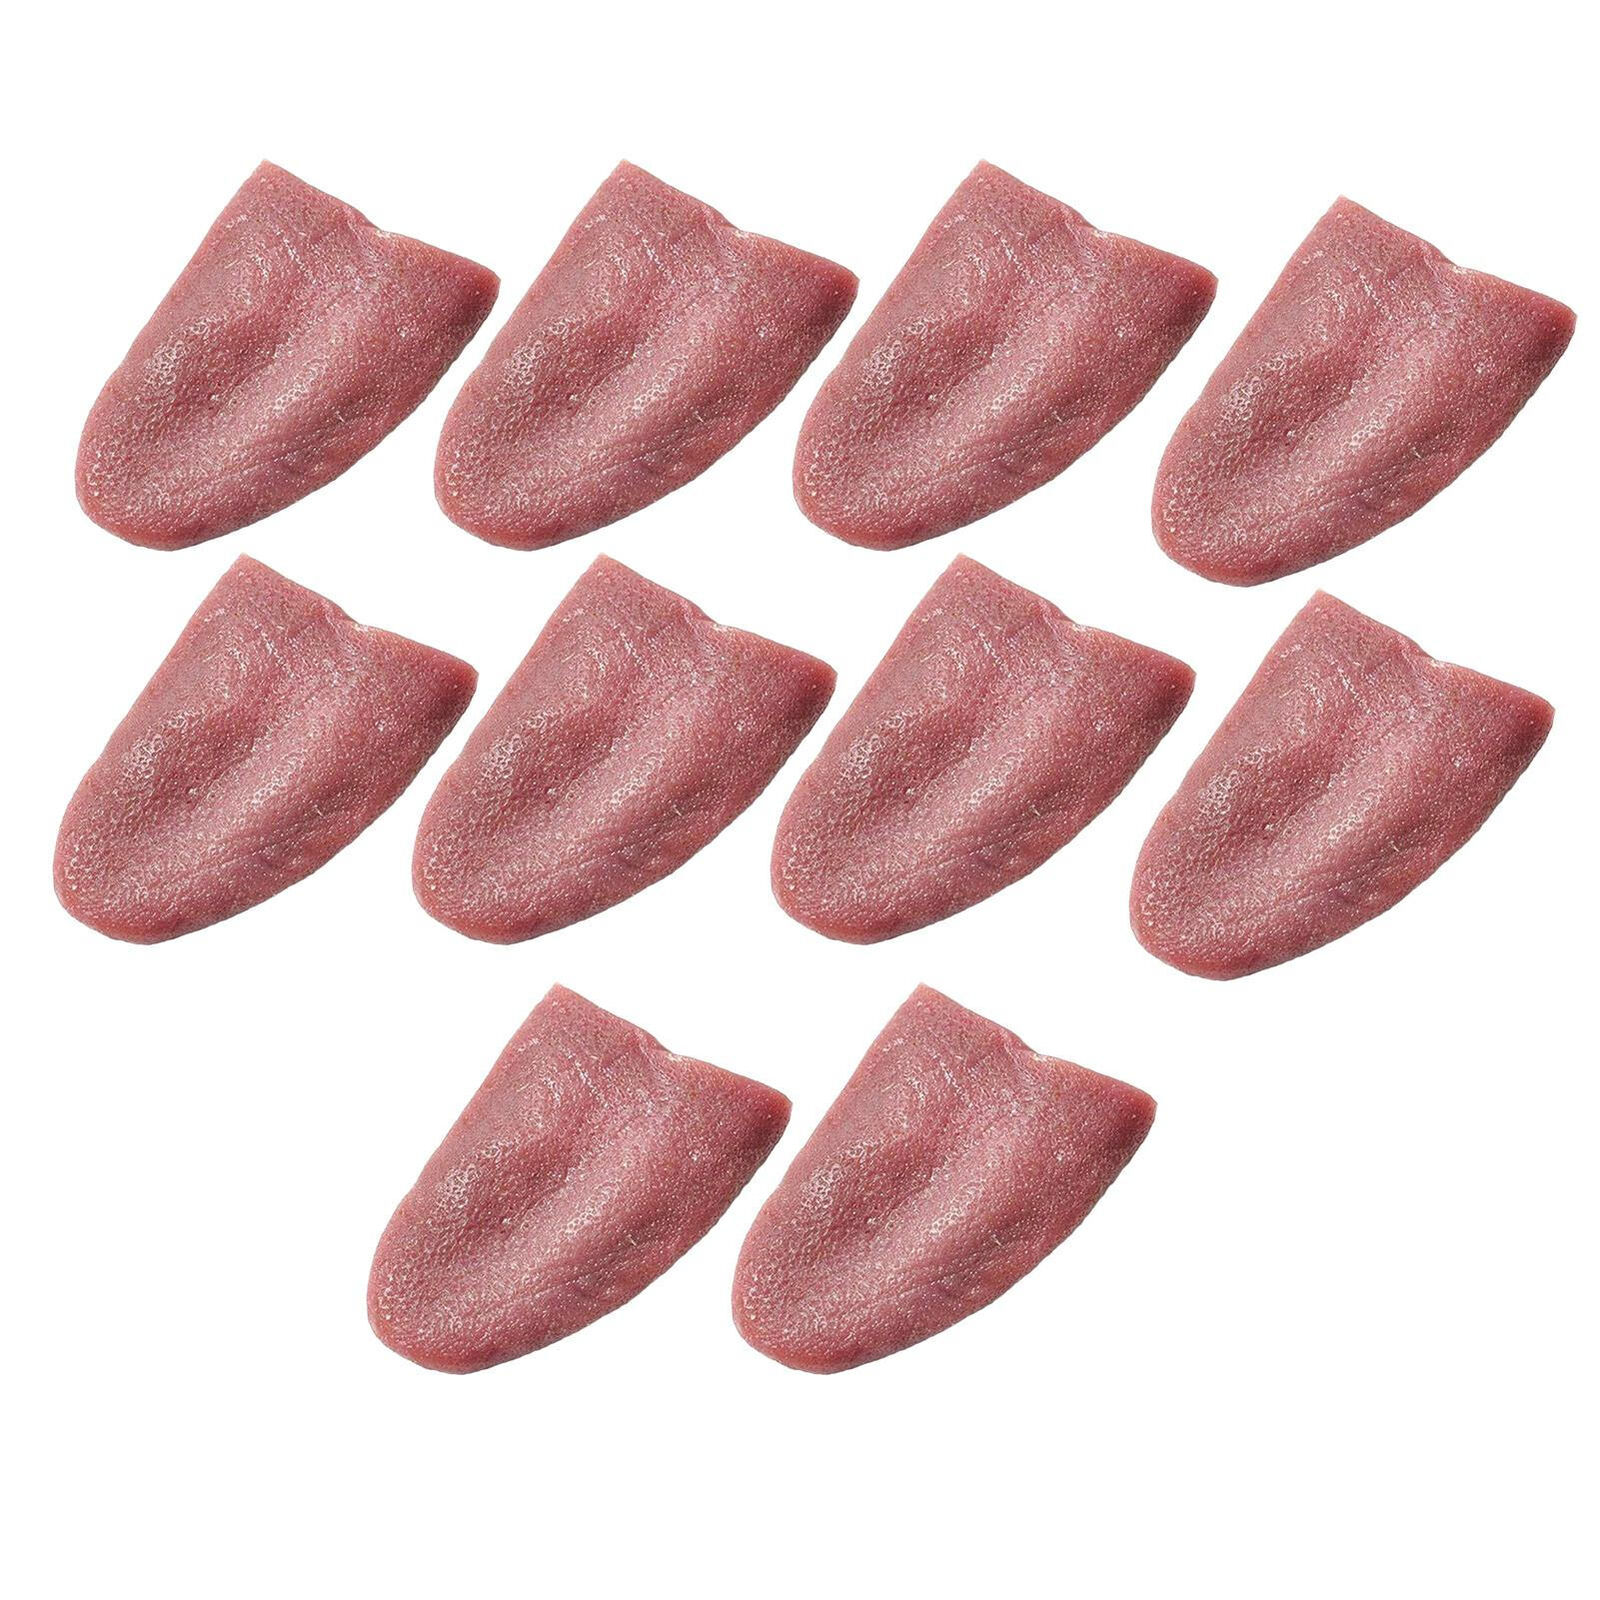 10 Pack Realistic Fake Tongue Stretch Gag Joke Prank Magic Trick Scary Funny Toy